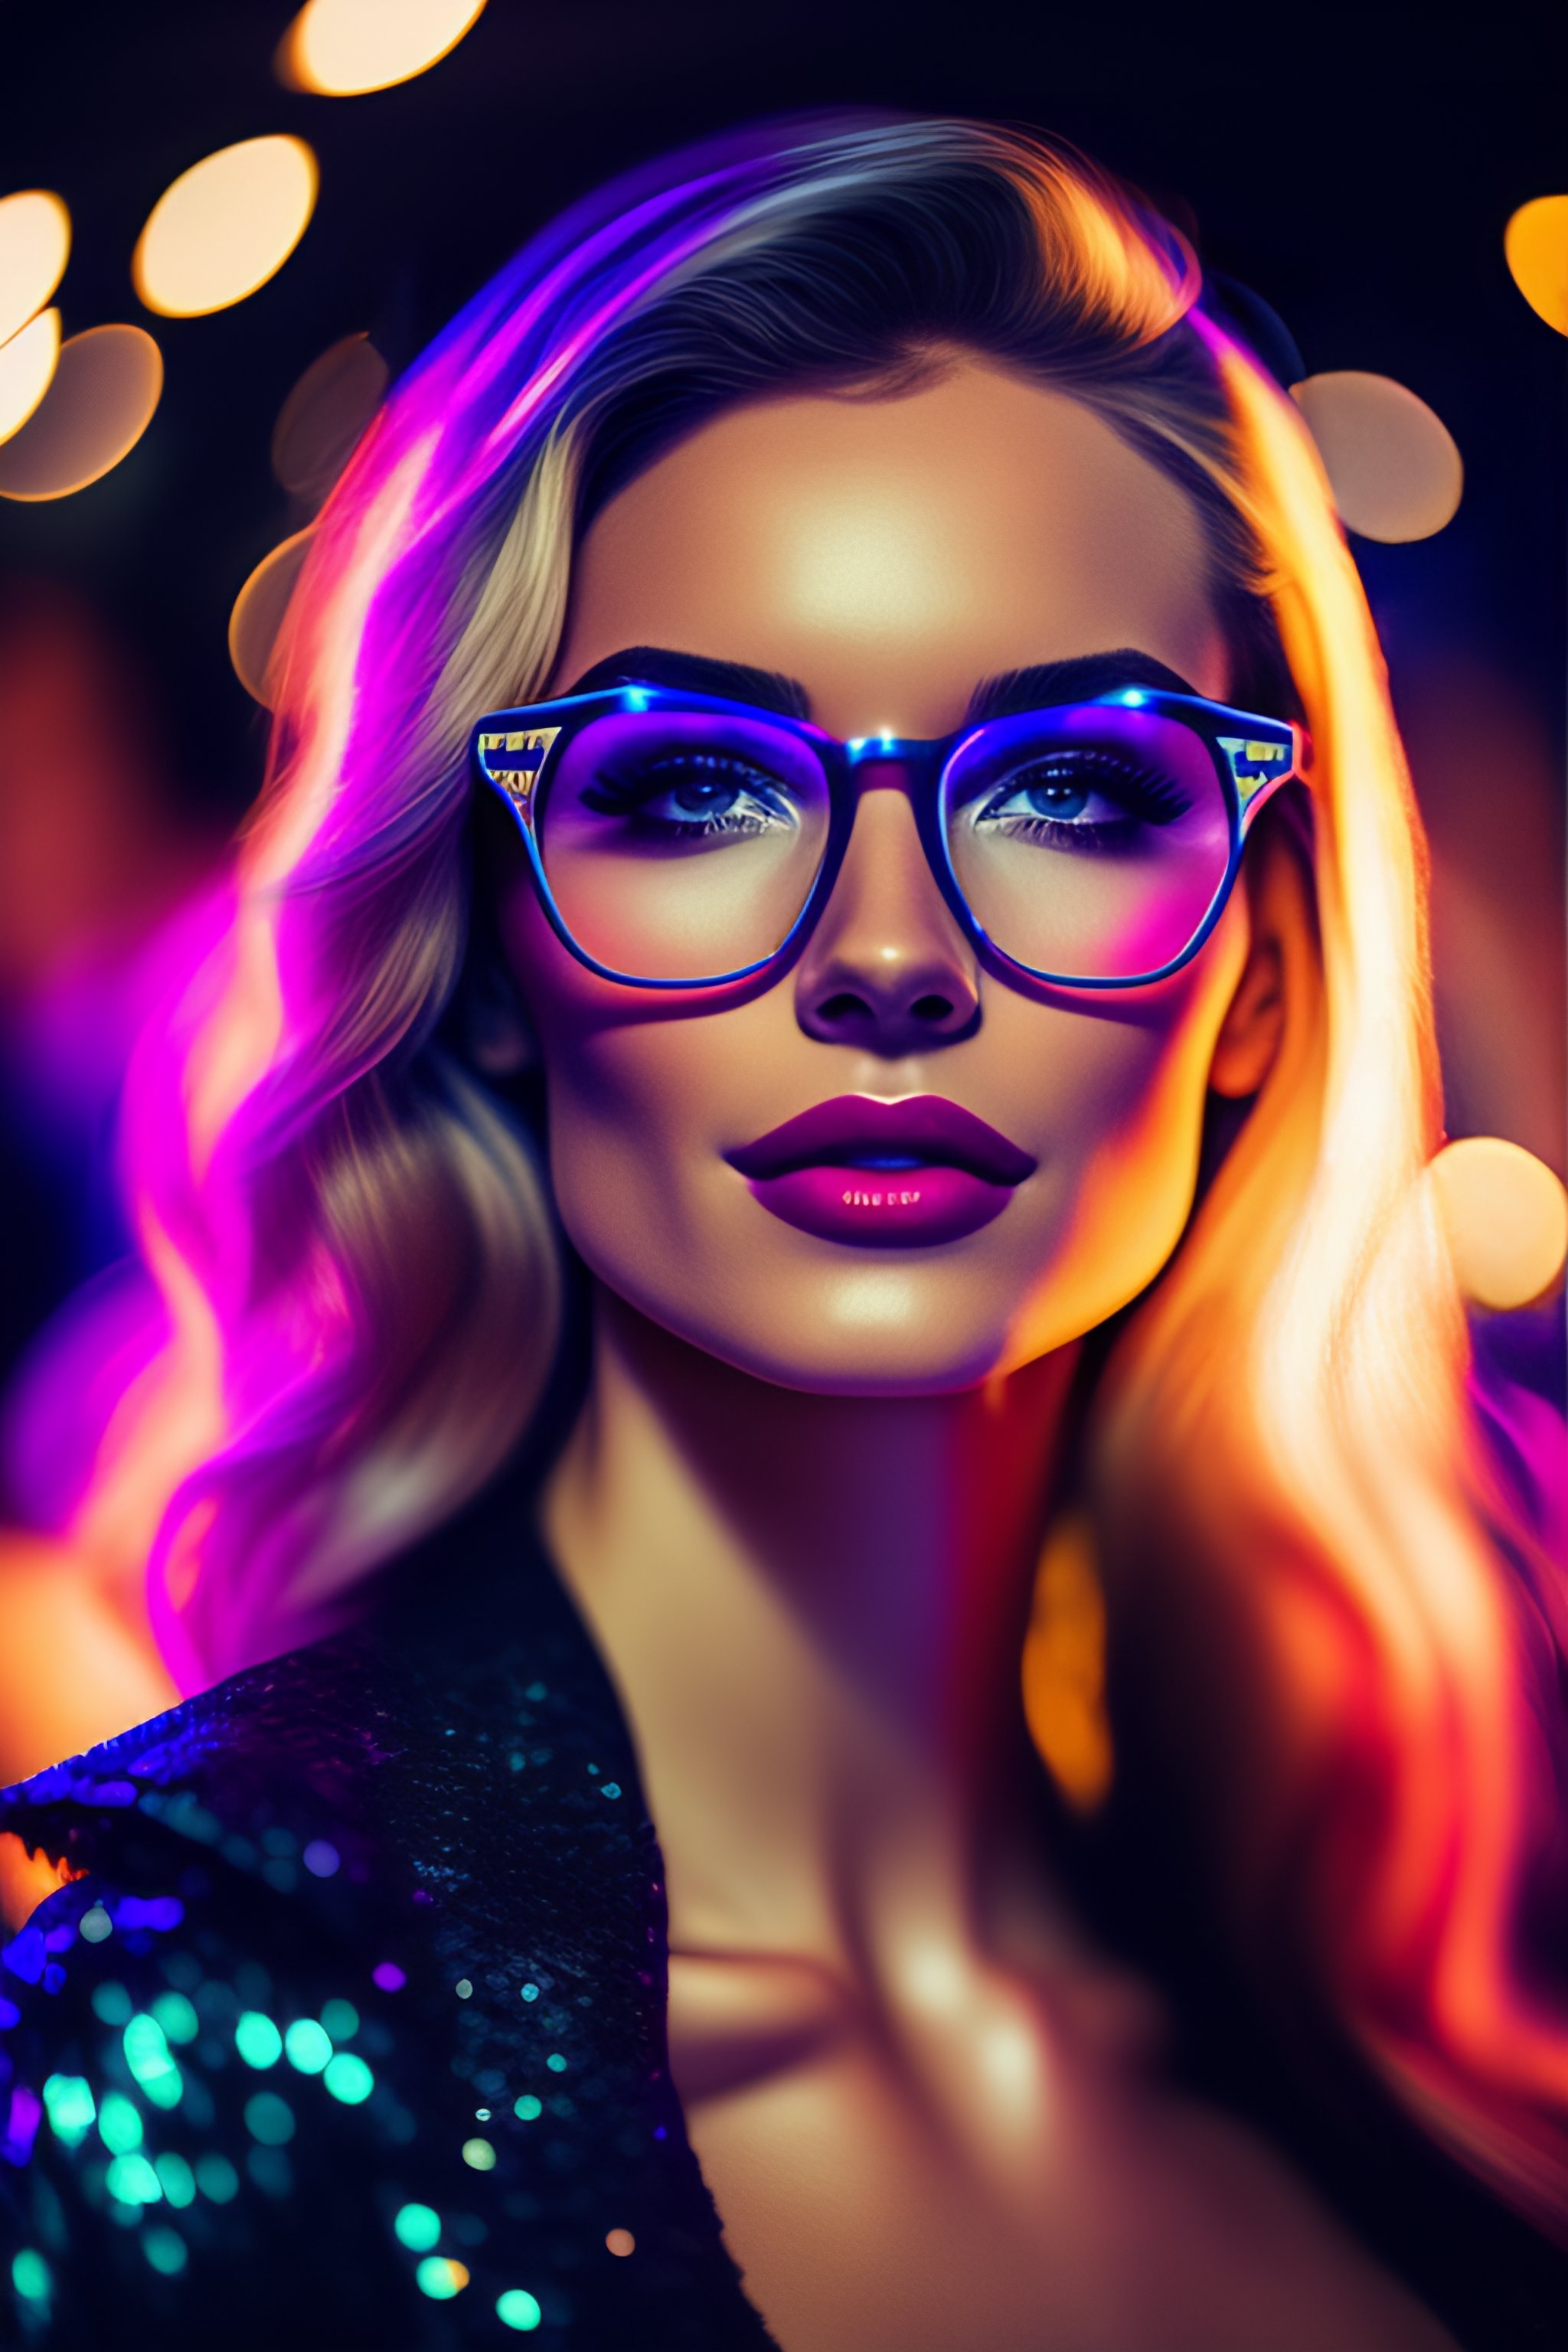 Lexica - A fashion girl in a night party with led cotillon glasses